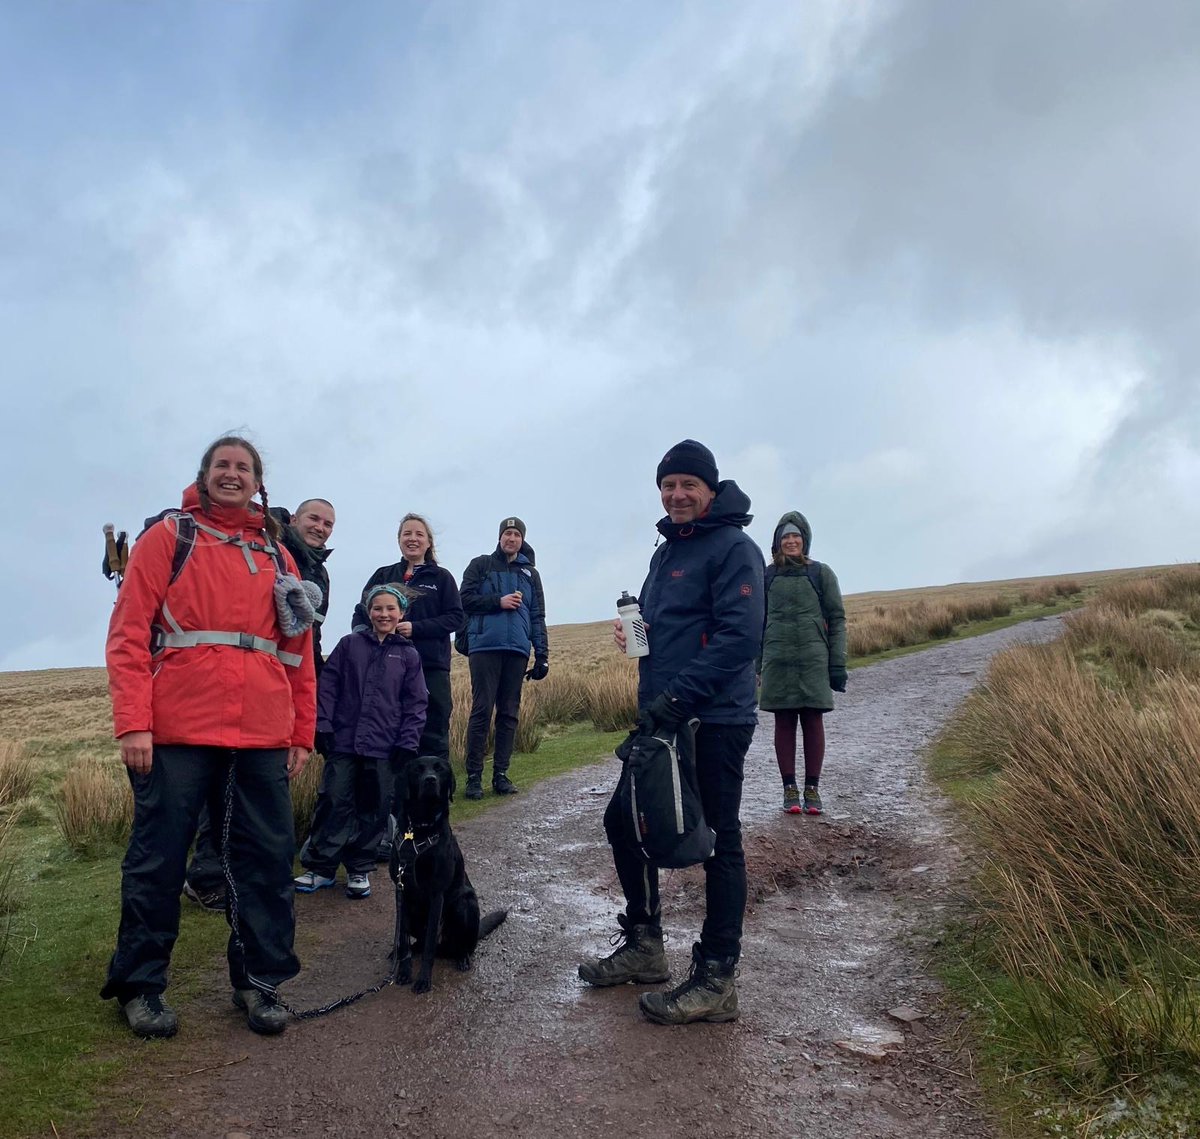 Our team scaling Pen y Fan for our Charity of the Year @MindCharity ,experienced all seasons in one day with sun,sleet,snow, minus 11 temperatures and 50 mph winds! Well done Emma Pennington,Katie Cox,Rob Allen,Mark Pollard,Jayne Cox,Jason Gorin,Anna Pollard,and Kayleigh Carter